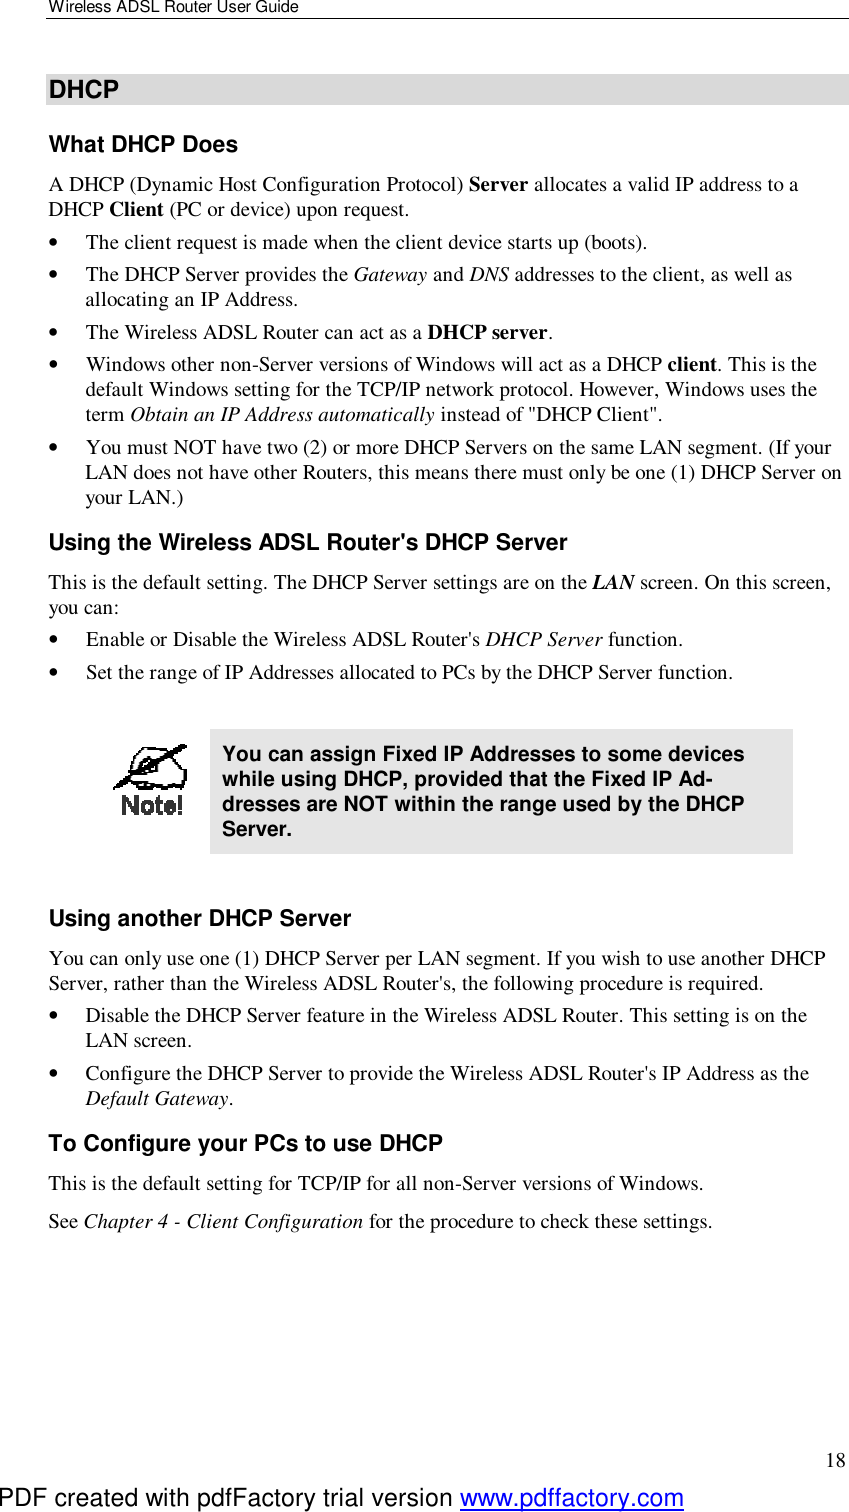 Wireless ADSL Router User Guide 18 DHCP What DHCP Does A DHCP (Dynamic Host Configuration Protocol) Server allocates a valid IP address to a DHCP Client (PC or device) upon request. •  The client request is made when the client device starts up (boots). •  The DHCP Server provides the Gateway and DNS addresses to the client, as well as allocating an IP Address. •  The Wireless ADSL Router can act as a DHCP server. •  Windows other non-Server versions of Windows will act as a DHCP client. This is the default Windows setting for the TCP/IP network protocol. However, Windows uses the term Obtain an IP Address automatically instead of &quot;DHCP Client&quot;. •  You must NOT have two (2) or more DHCP Servers on the same LAN segment. (If your LAN does not have other Routers, this means there must only be one (1) DHCP Server on your LAN.) Using the Wireless ADSL Router&apos;s DHCP Server This is the default setting. The DHCP Server settings are on the LAN screen. On this screen, you can: •  Enable or Disable the Wireless ADSL Router&apos;s DHCP Server function. •  Set the range of IP Addresses allocated to PCs by the DHCP Server function.   You can assign Fixed IP Addresses to some devices while using DHCP, provided that the Fixed IP Ad-dresses are NOT within the range used by the DHCP Server.  Using another DHCP Server You can only use one (1) DHCP Server per LAN segment. If you wish to use another DHCP Server, rather than the Wireless ADSL Router&apos;s, the following procedure is required. •  Disable the DHCP Server feature in the Wireless ADSL Router. This setting is on the LAN screen. •  Configure the DHCP Server to provide the Wireless ADSL Router&apos;s IP Address as the Default Gateway. To Configure your PCs to use DHCP This is the default setting for TCP/IP for all non-Server versions of Windows. See Chapter 4 - Client Configuration for the procedure to check these settings.   PDF created with pdfFactory trial version www.pdffactory.com